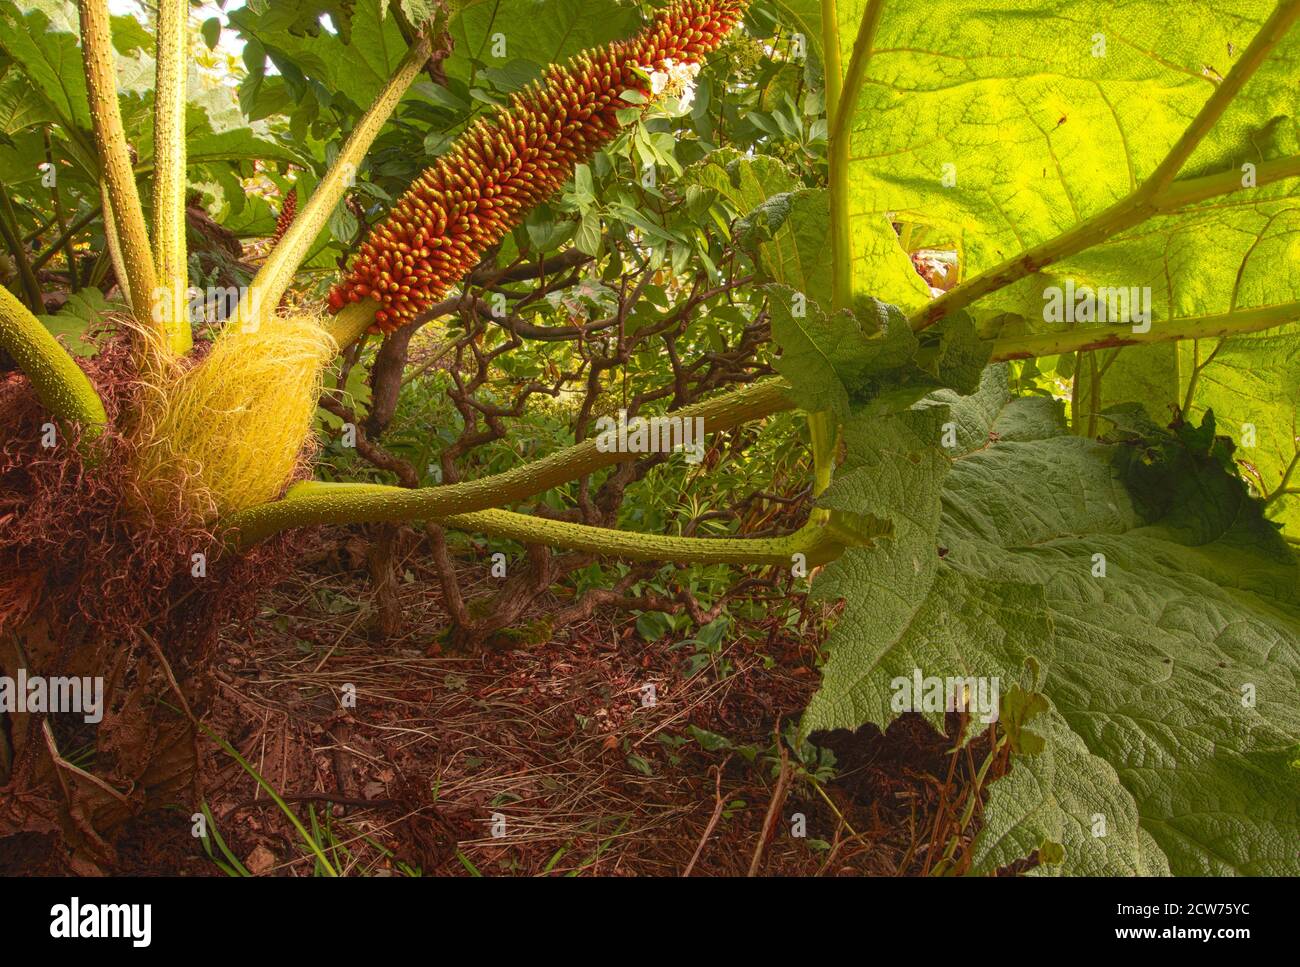 Gunnera plant showing underside of leaf and fruit as well as structure Stock Photo